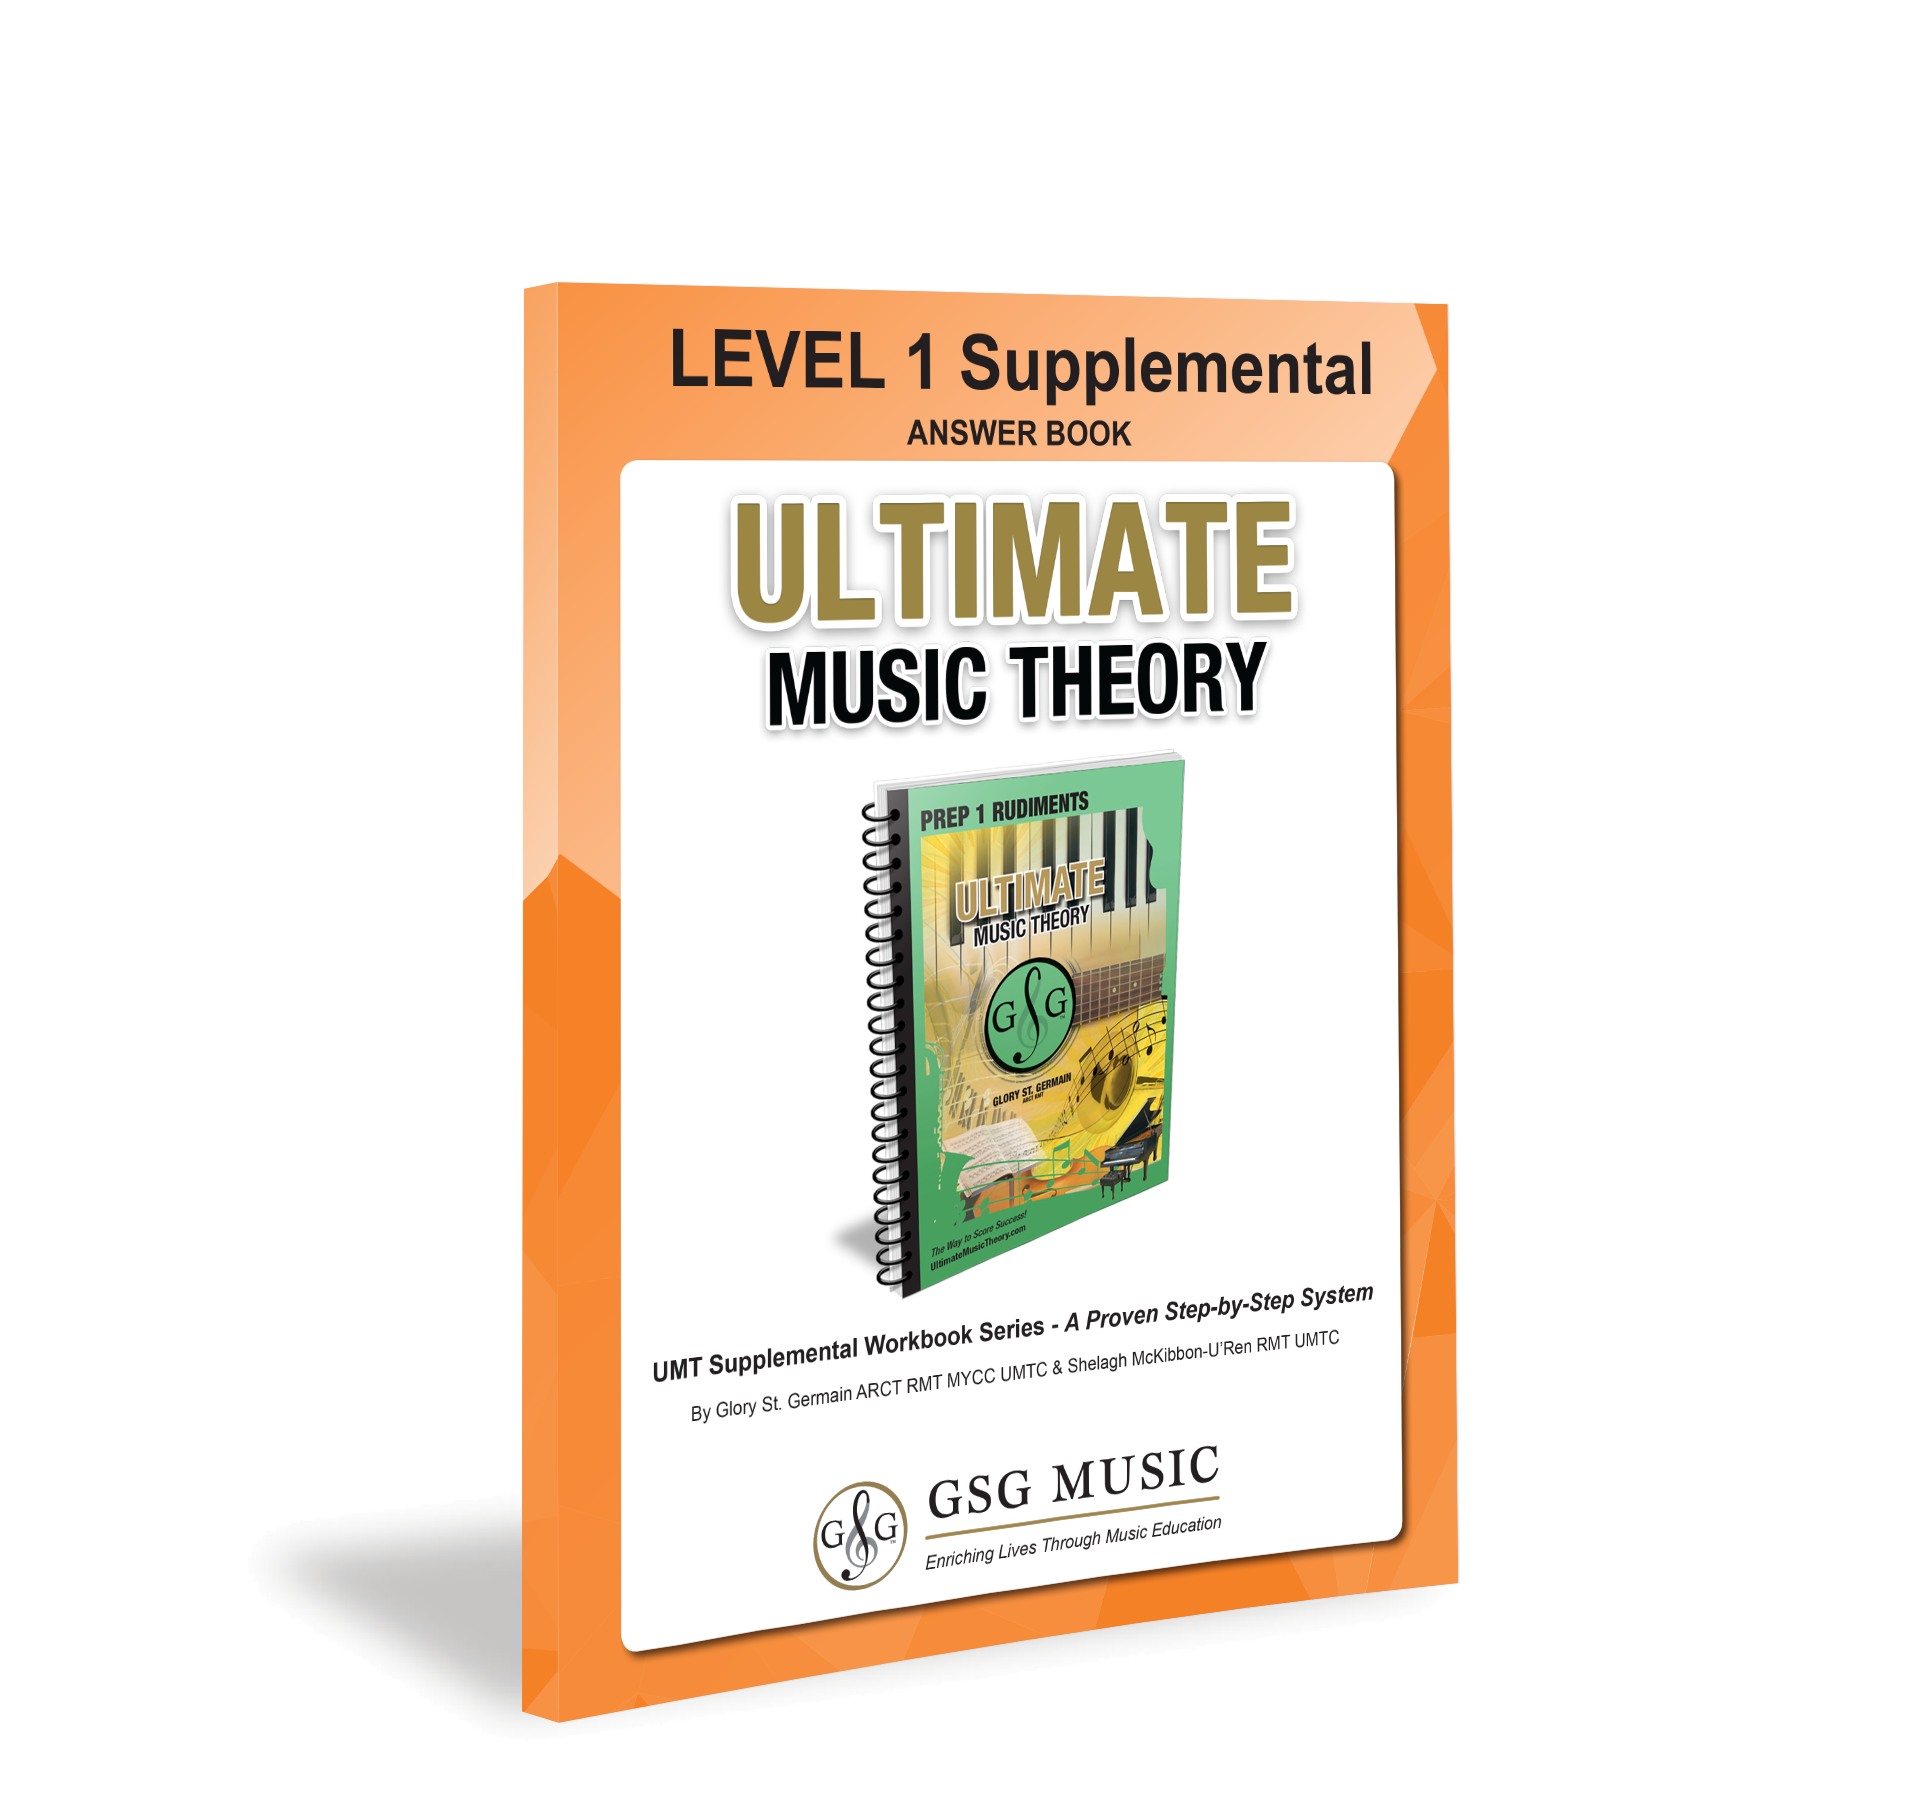 LEVEL 1 Supplemental Answers Download